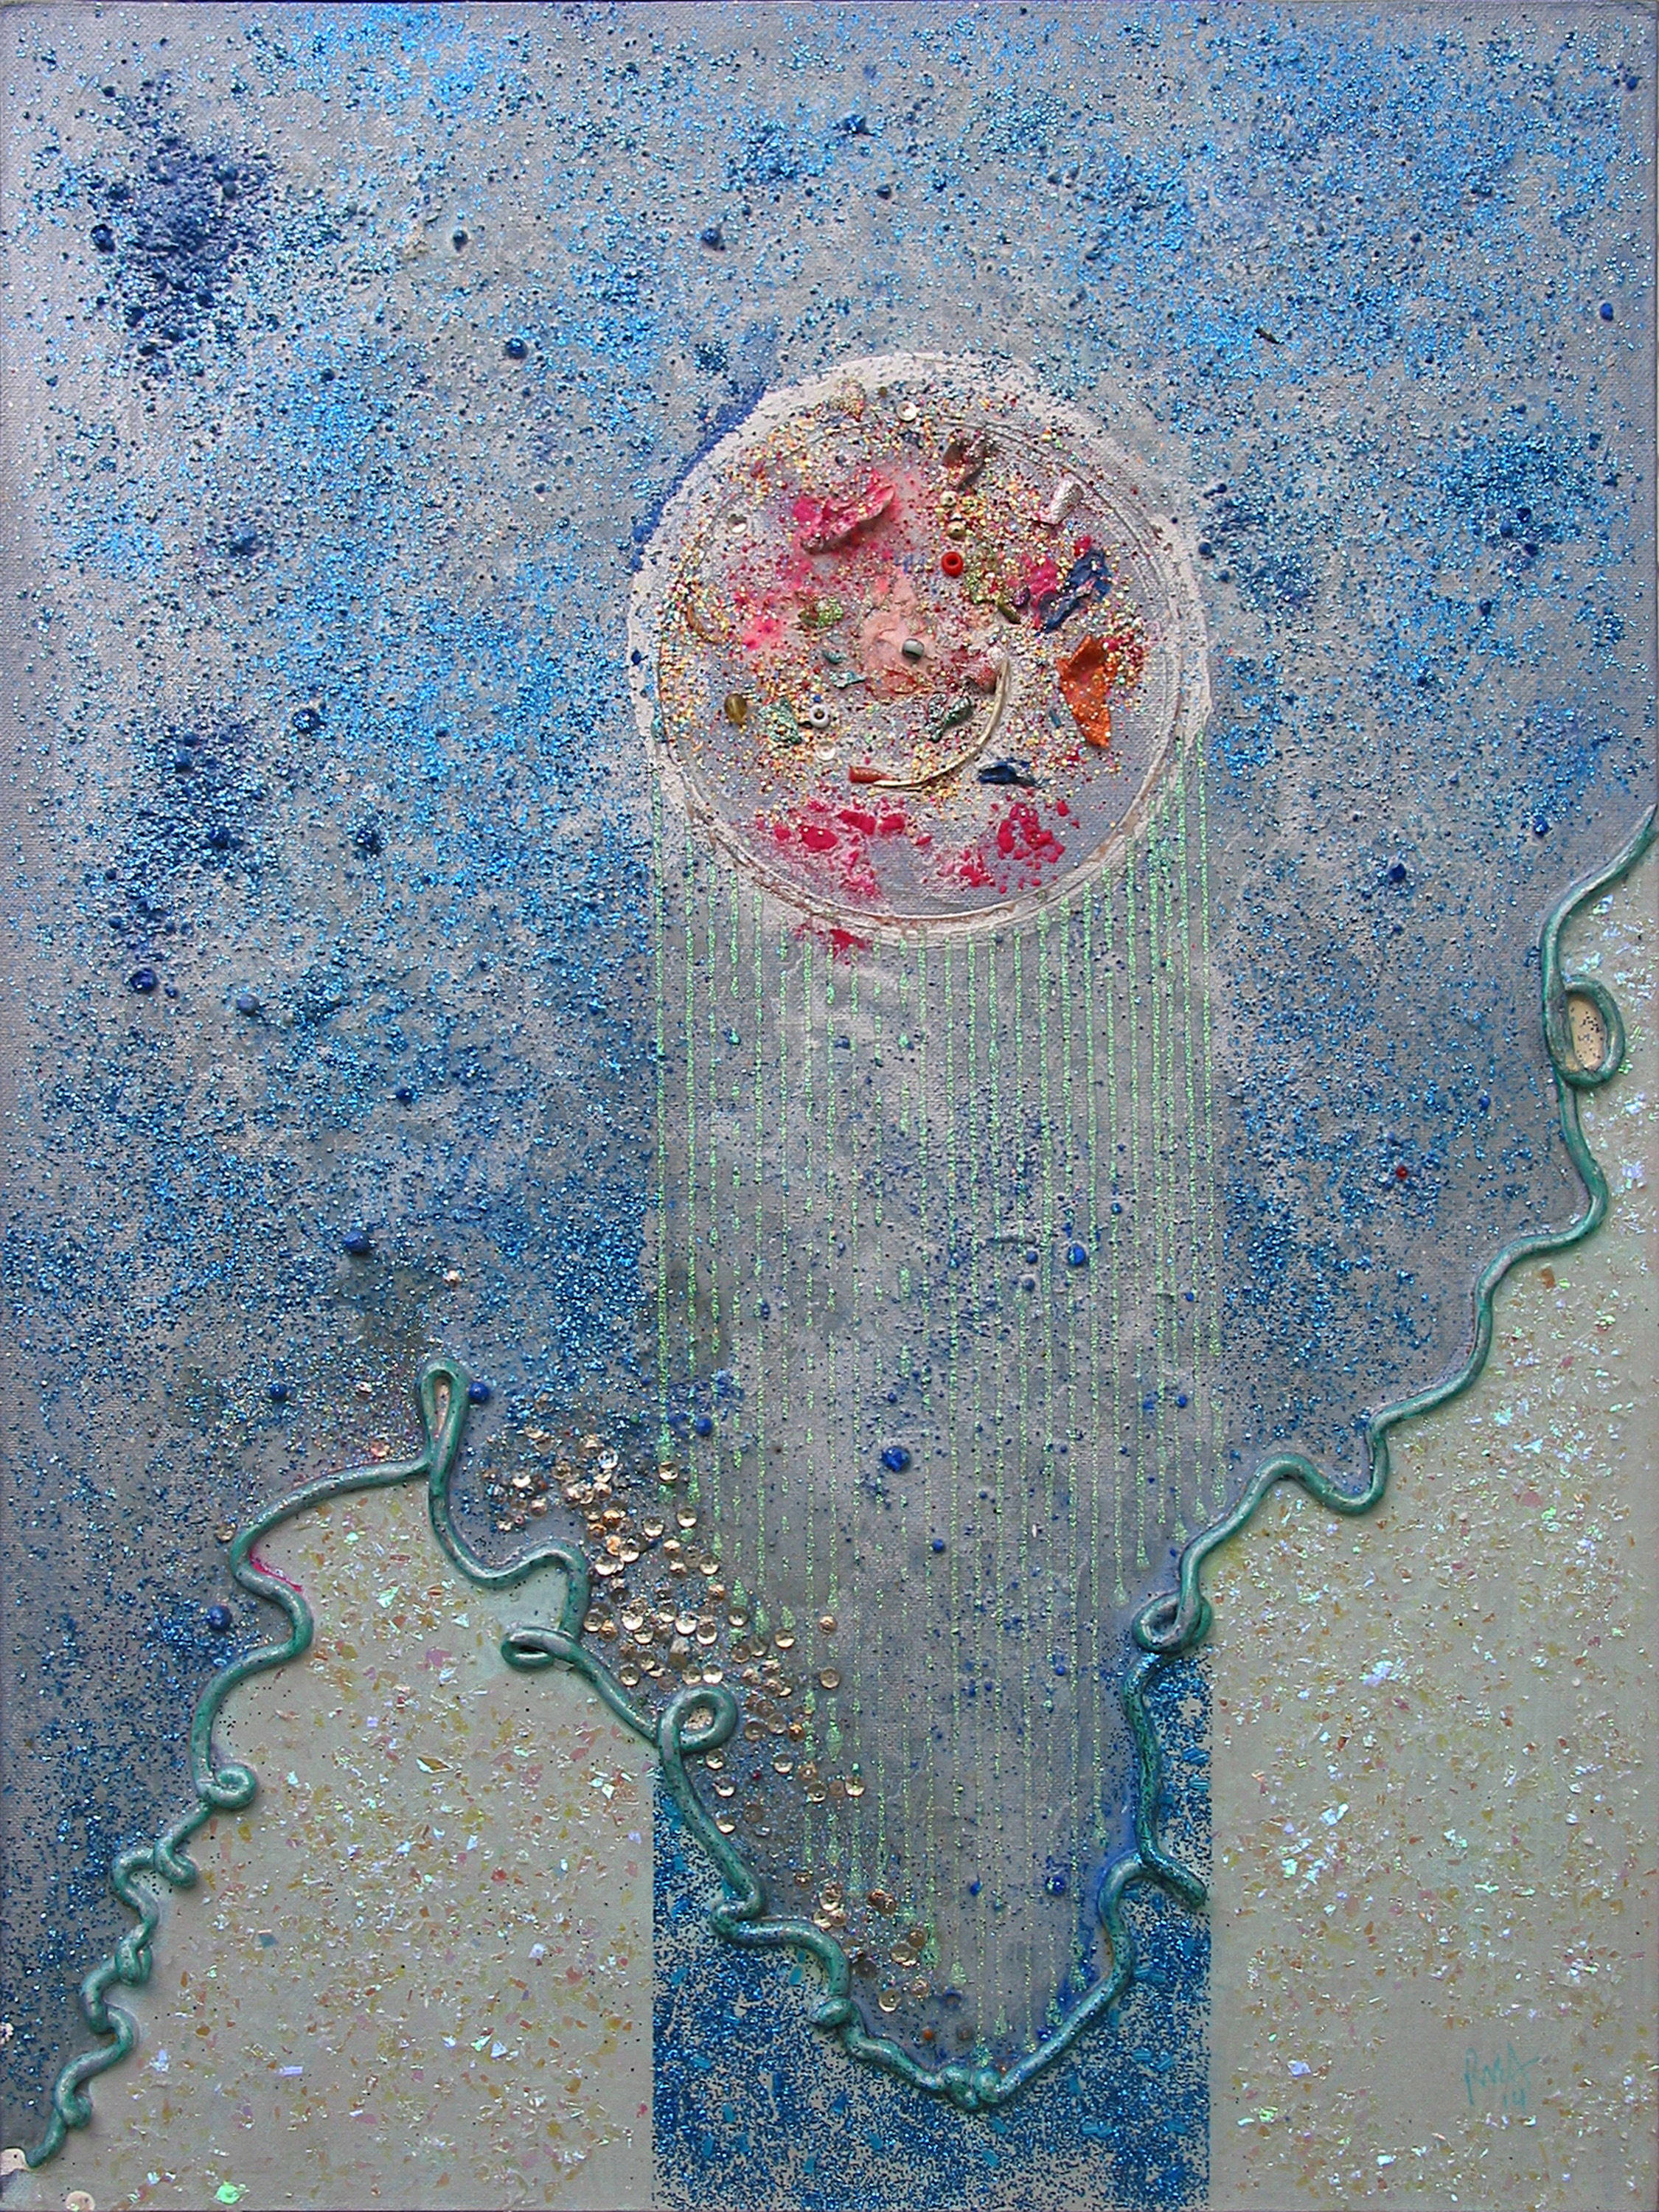 Mystic Landscape and the Immediate Excitement of Starshine, 24" x 18", acrylic and glitter on canvas panel, 2014